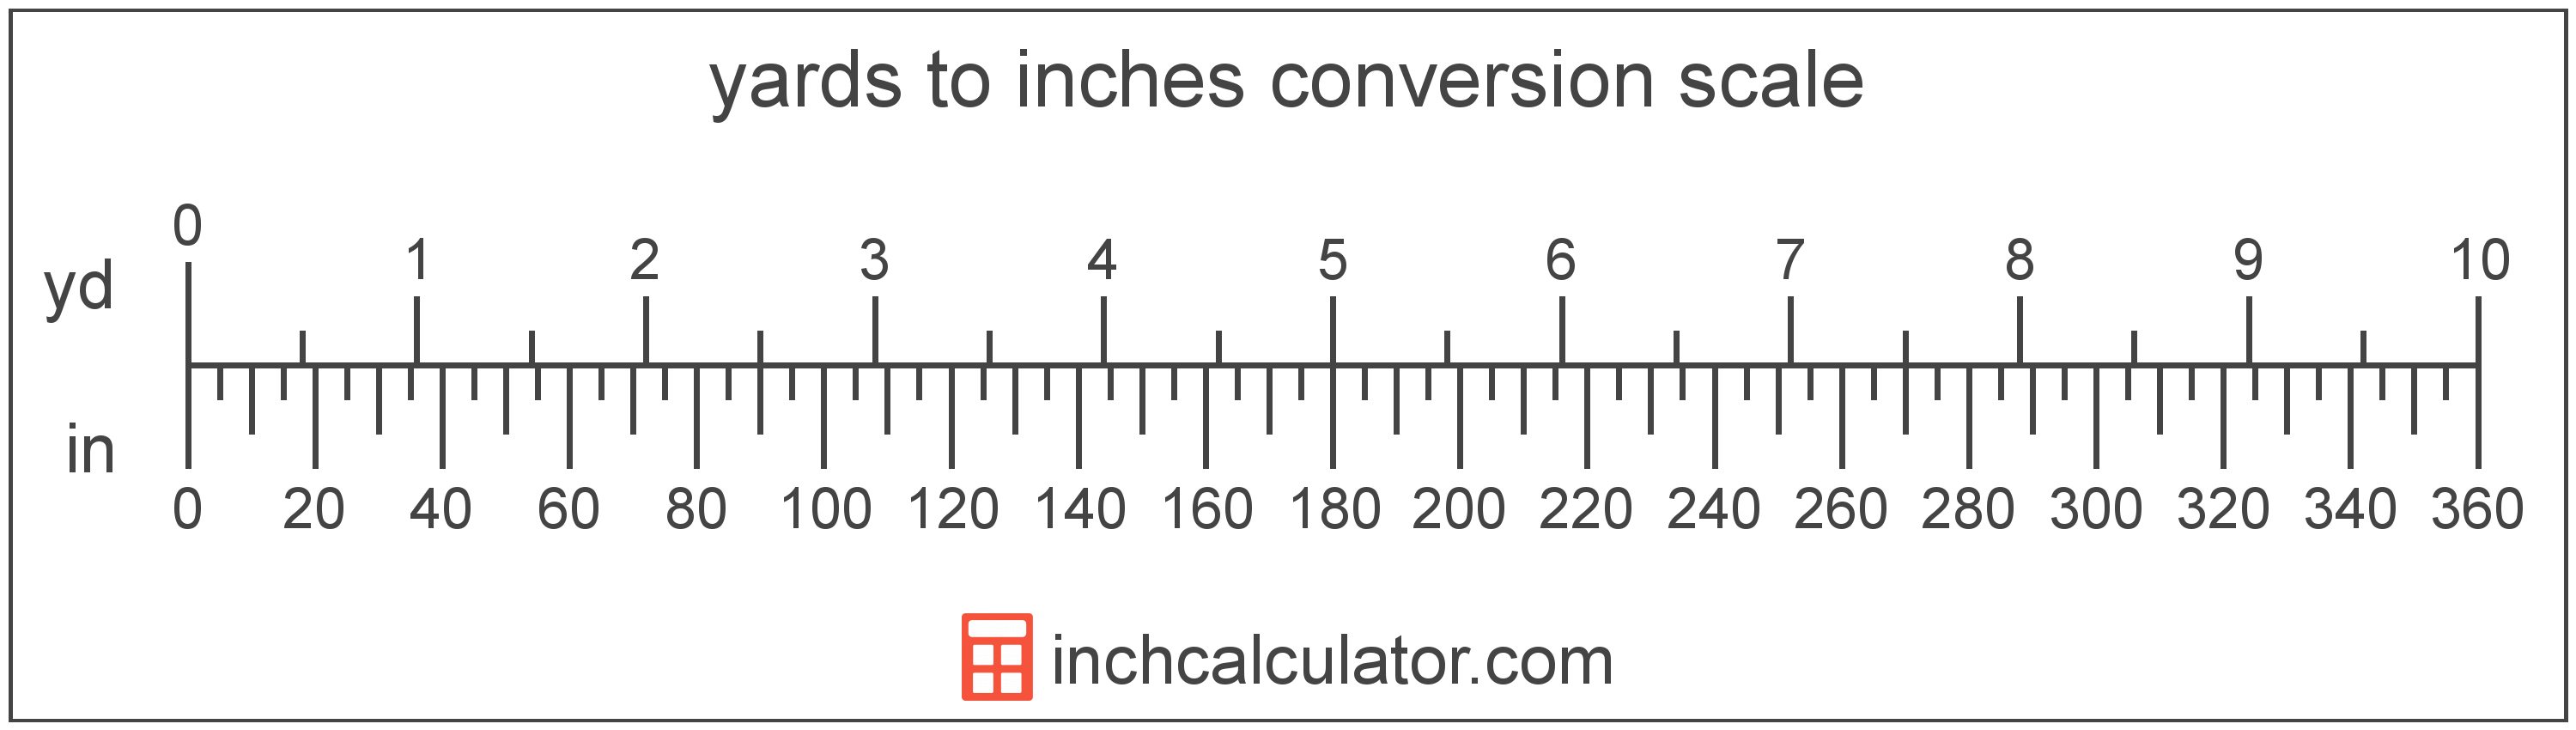 Yards to Inches Conversion (yd to in) - Inch Calculator